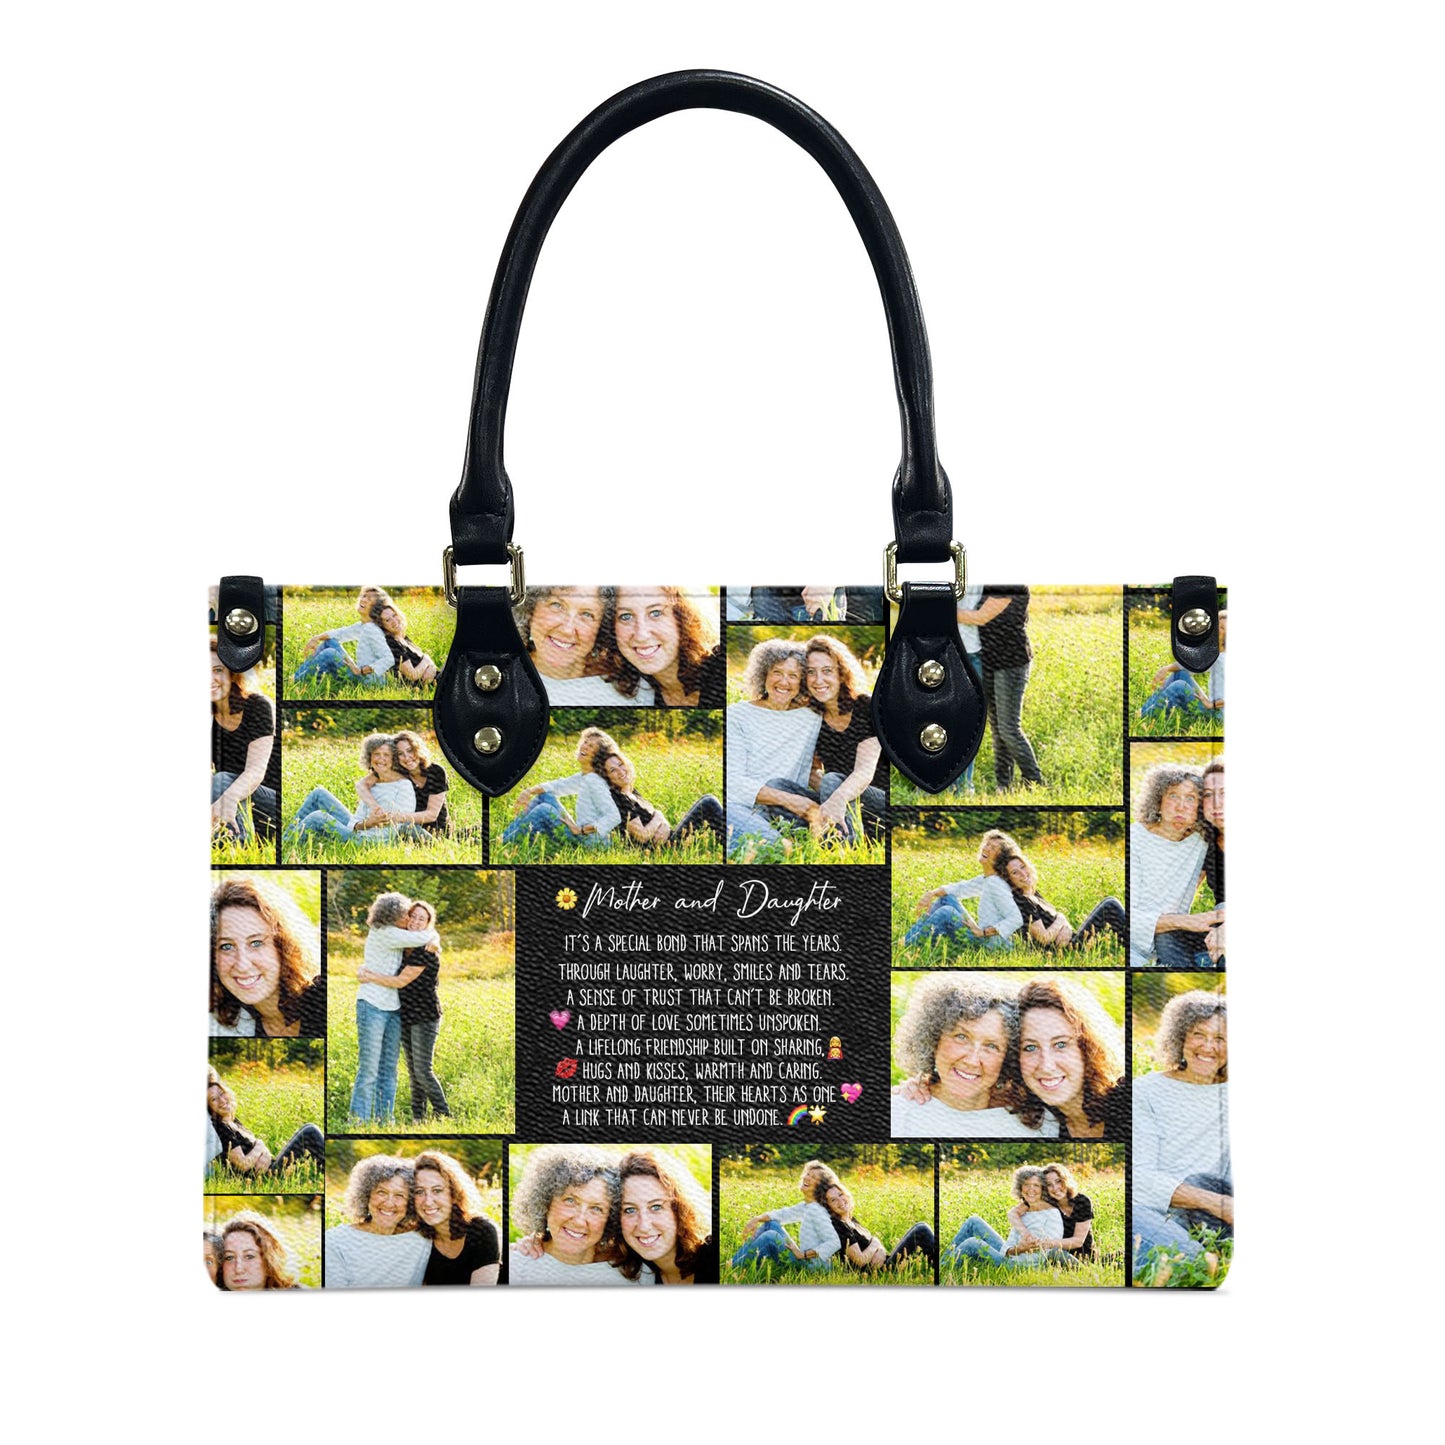 Create a Mother's Day Gift for Mom with Collage Photo & Text on Leather Handbag with Ziplock